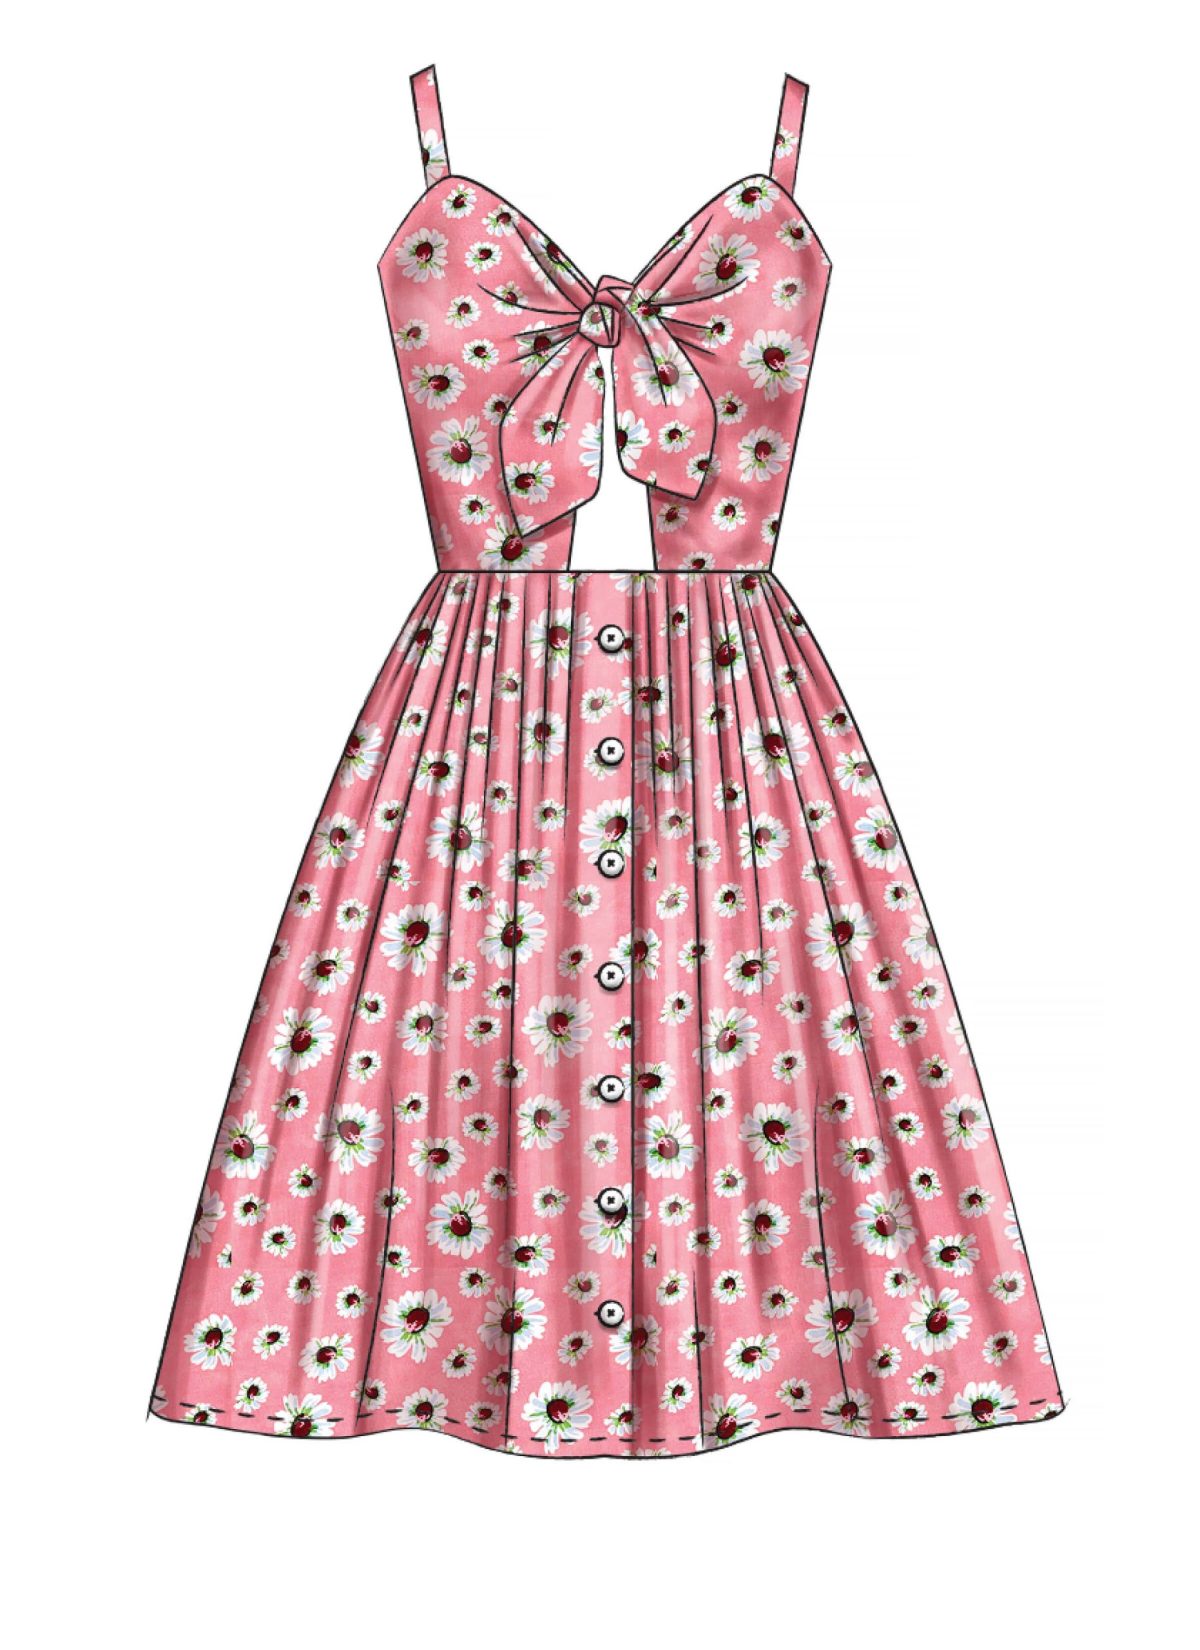 McCall's Sewing Pattern M7950 Misses' Dresses